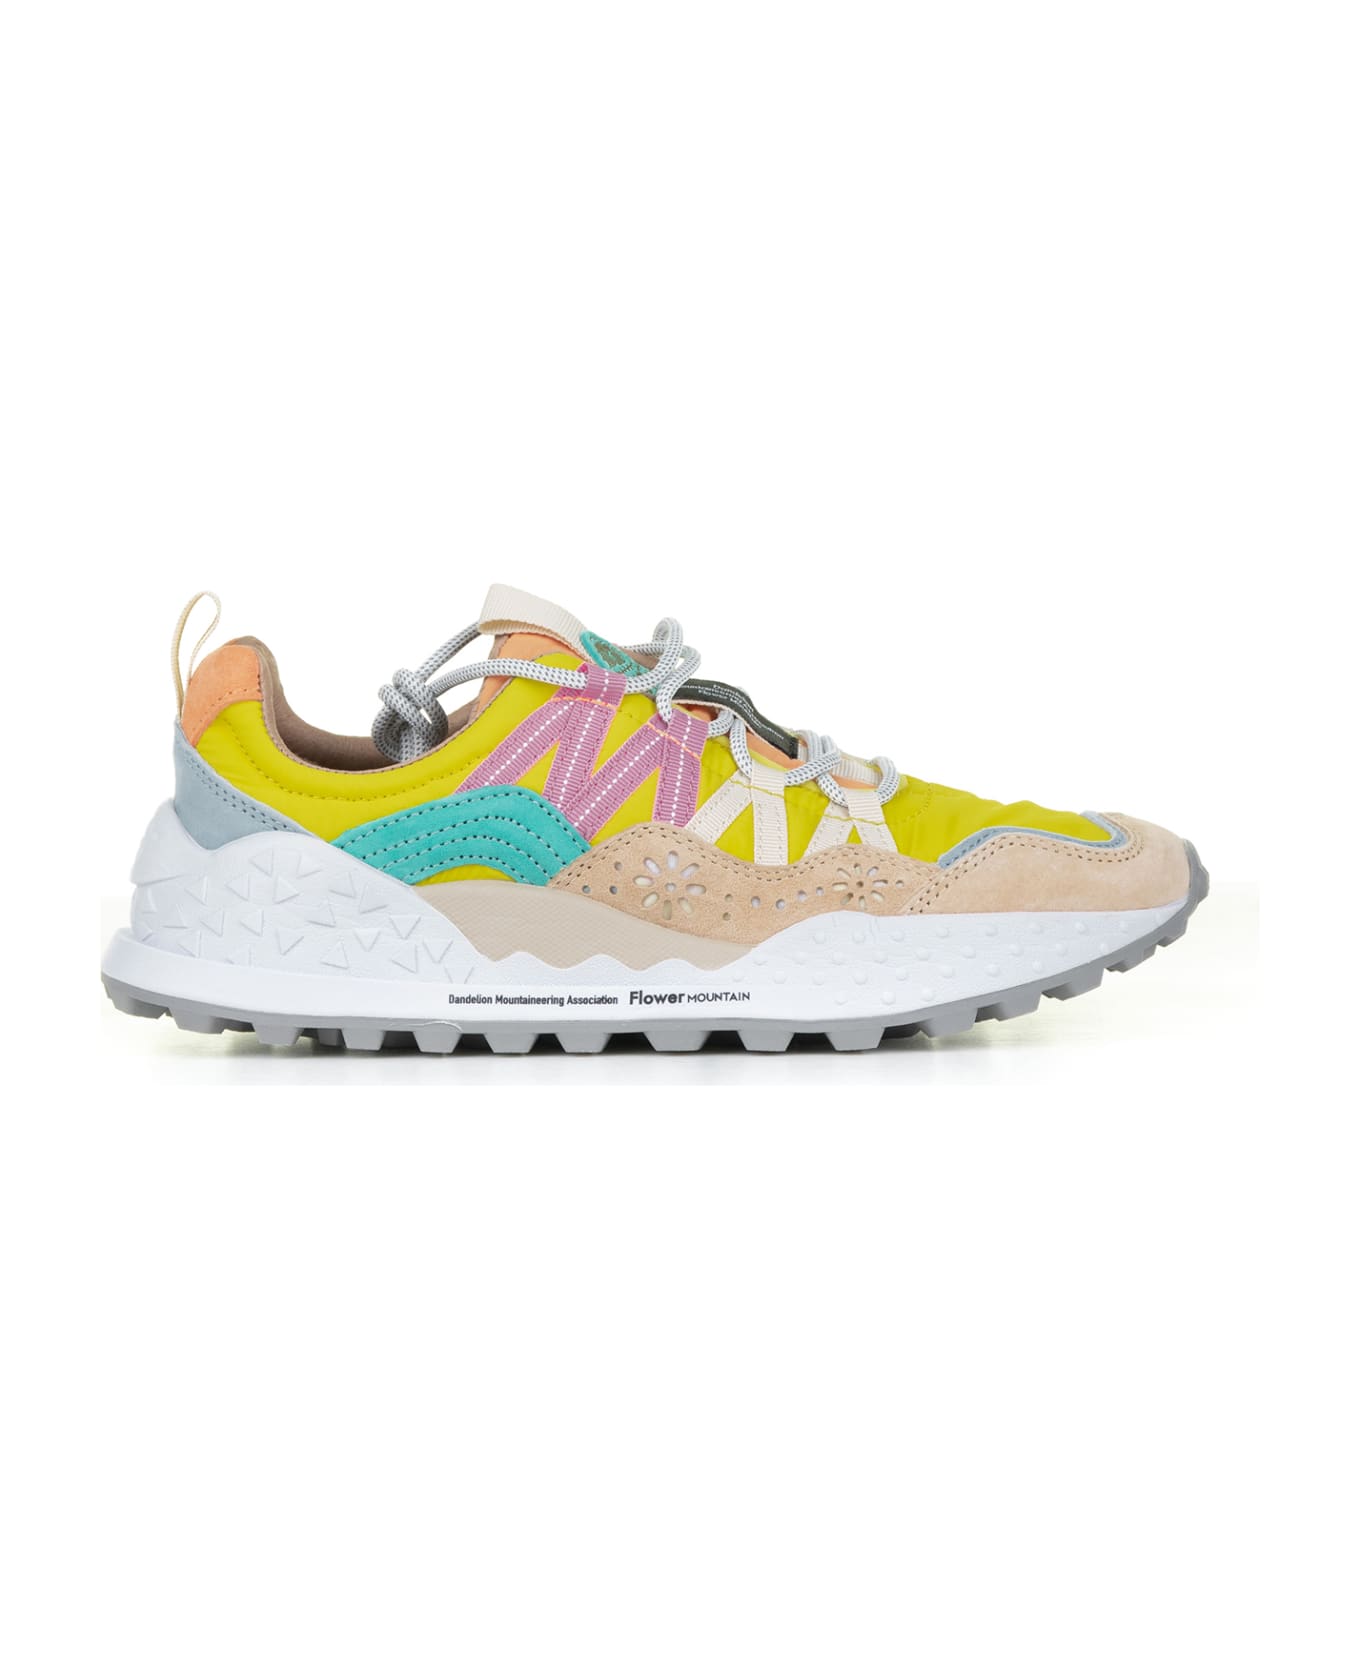 Flower Mountain Multicolored Washi Sneakers In Suede And Nylon - BEIGE YELLOW スニーカー